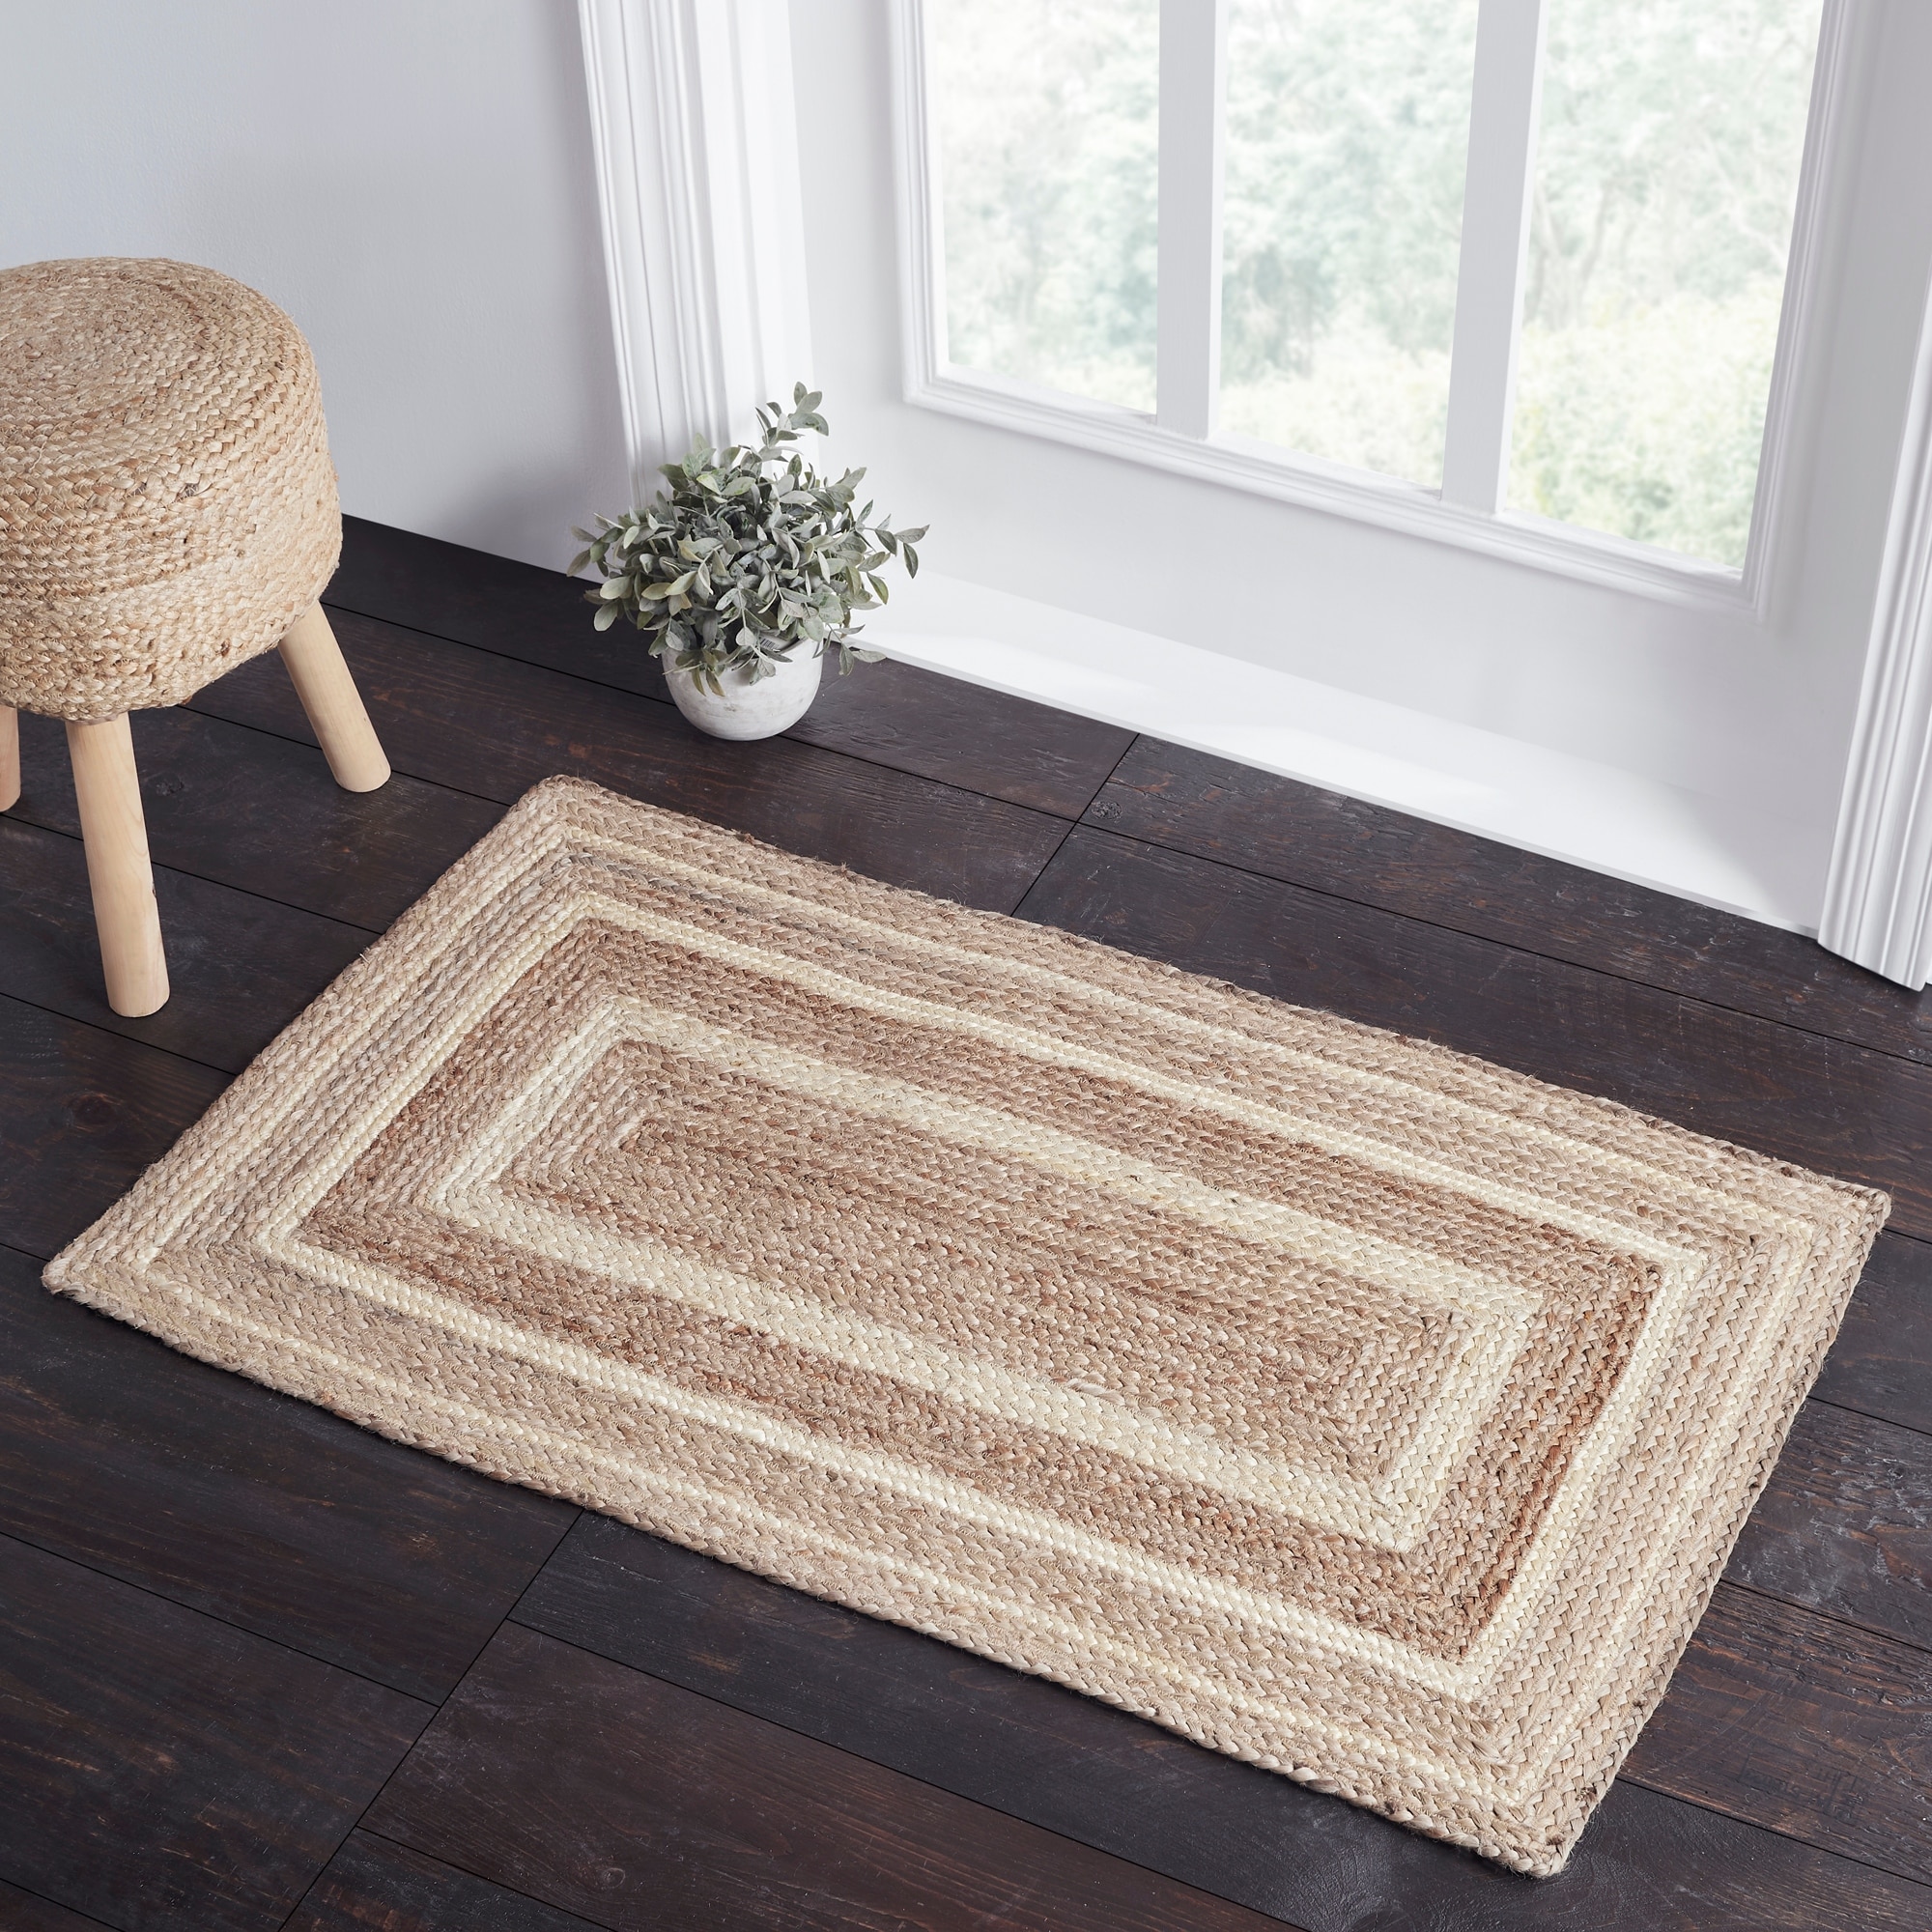 Braided Area Rugs - Bed Bath & Beyond